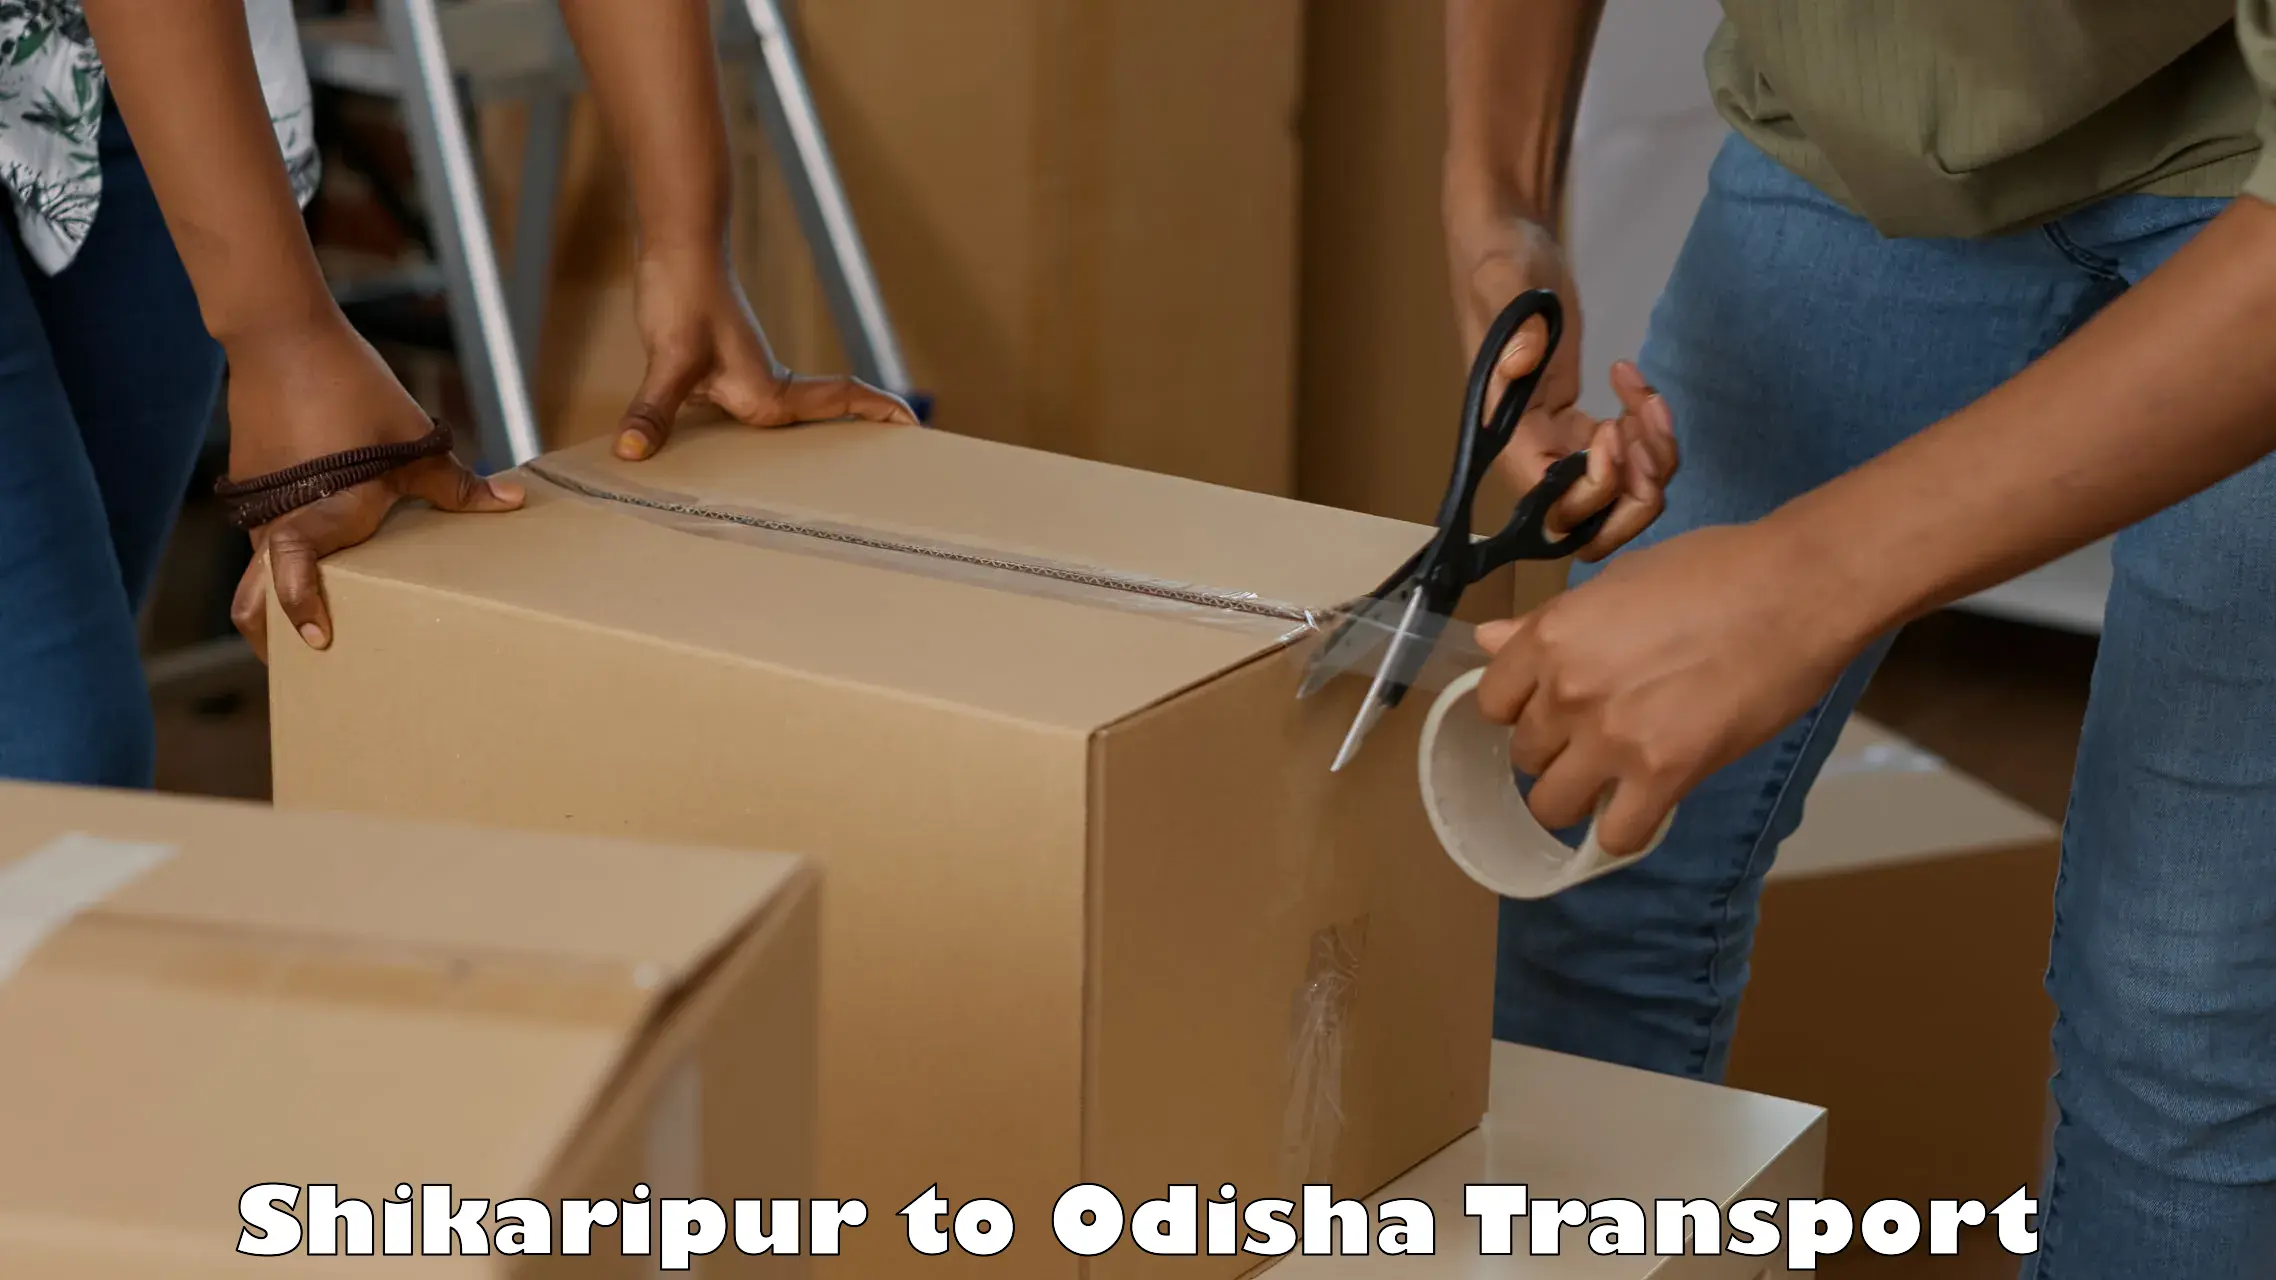 Commercial transport service Shikaripur to Muribahal